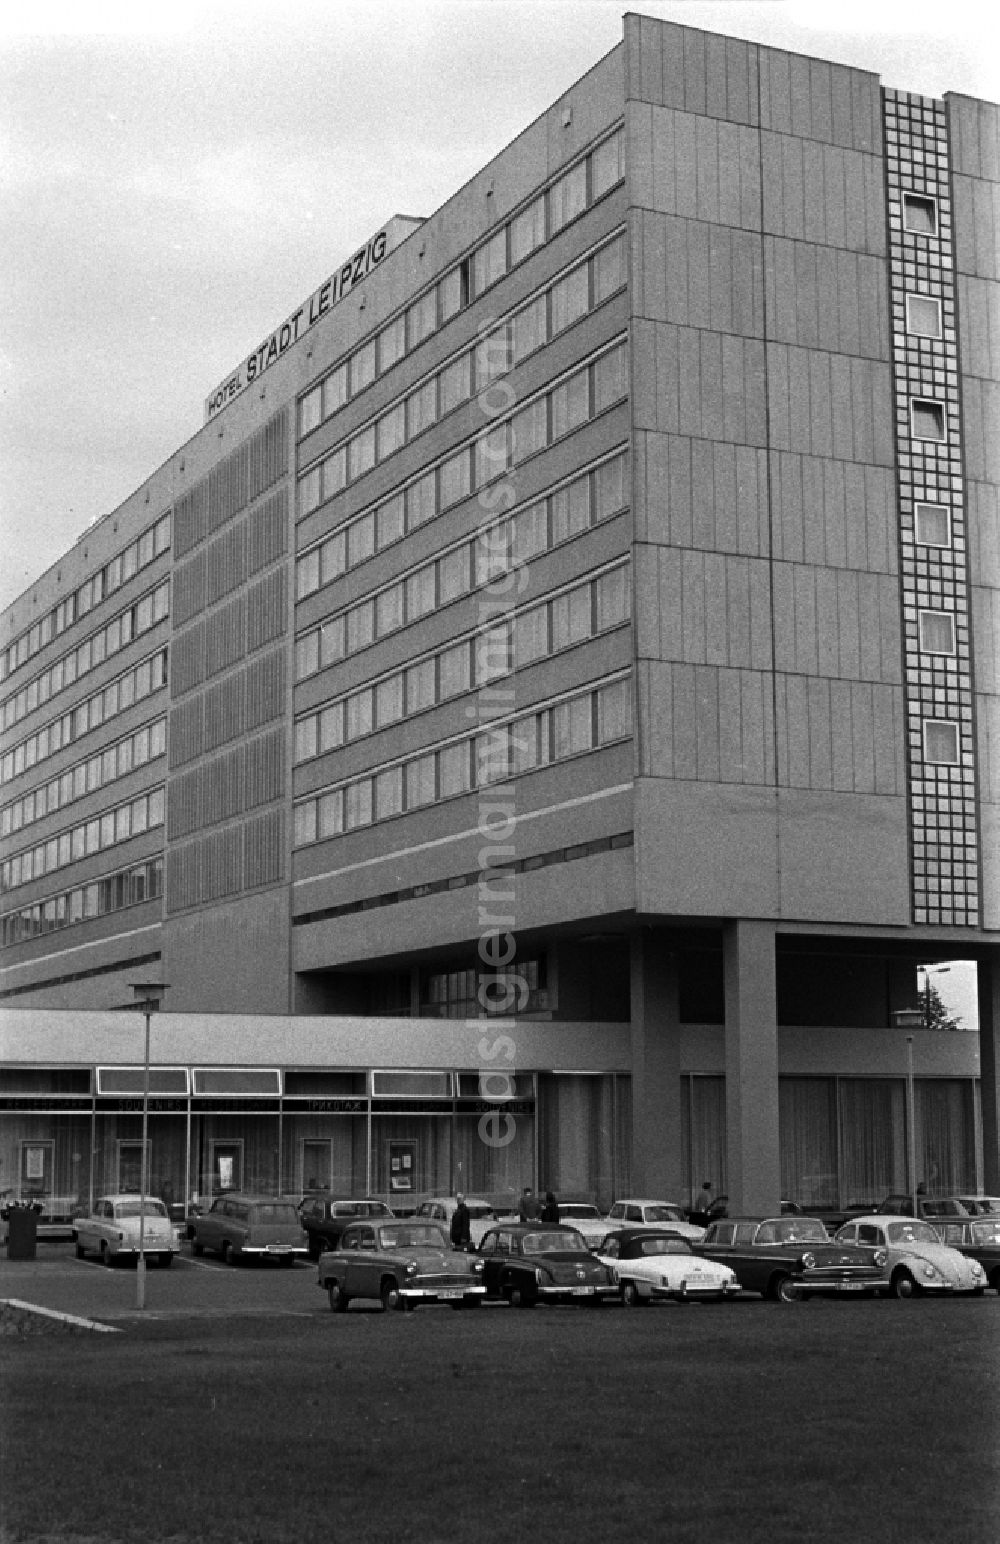 Leipzig: The hotel was opened in 1964 in Leipzig. From 1965 to 1990 it was operated by Inter Hotel GDR until 1992 by the Inter Hotel AG. In its place now stands a new building erected in the 9